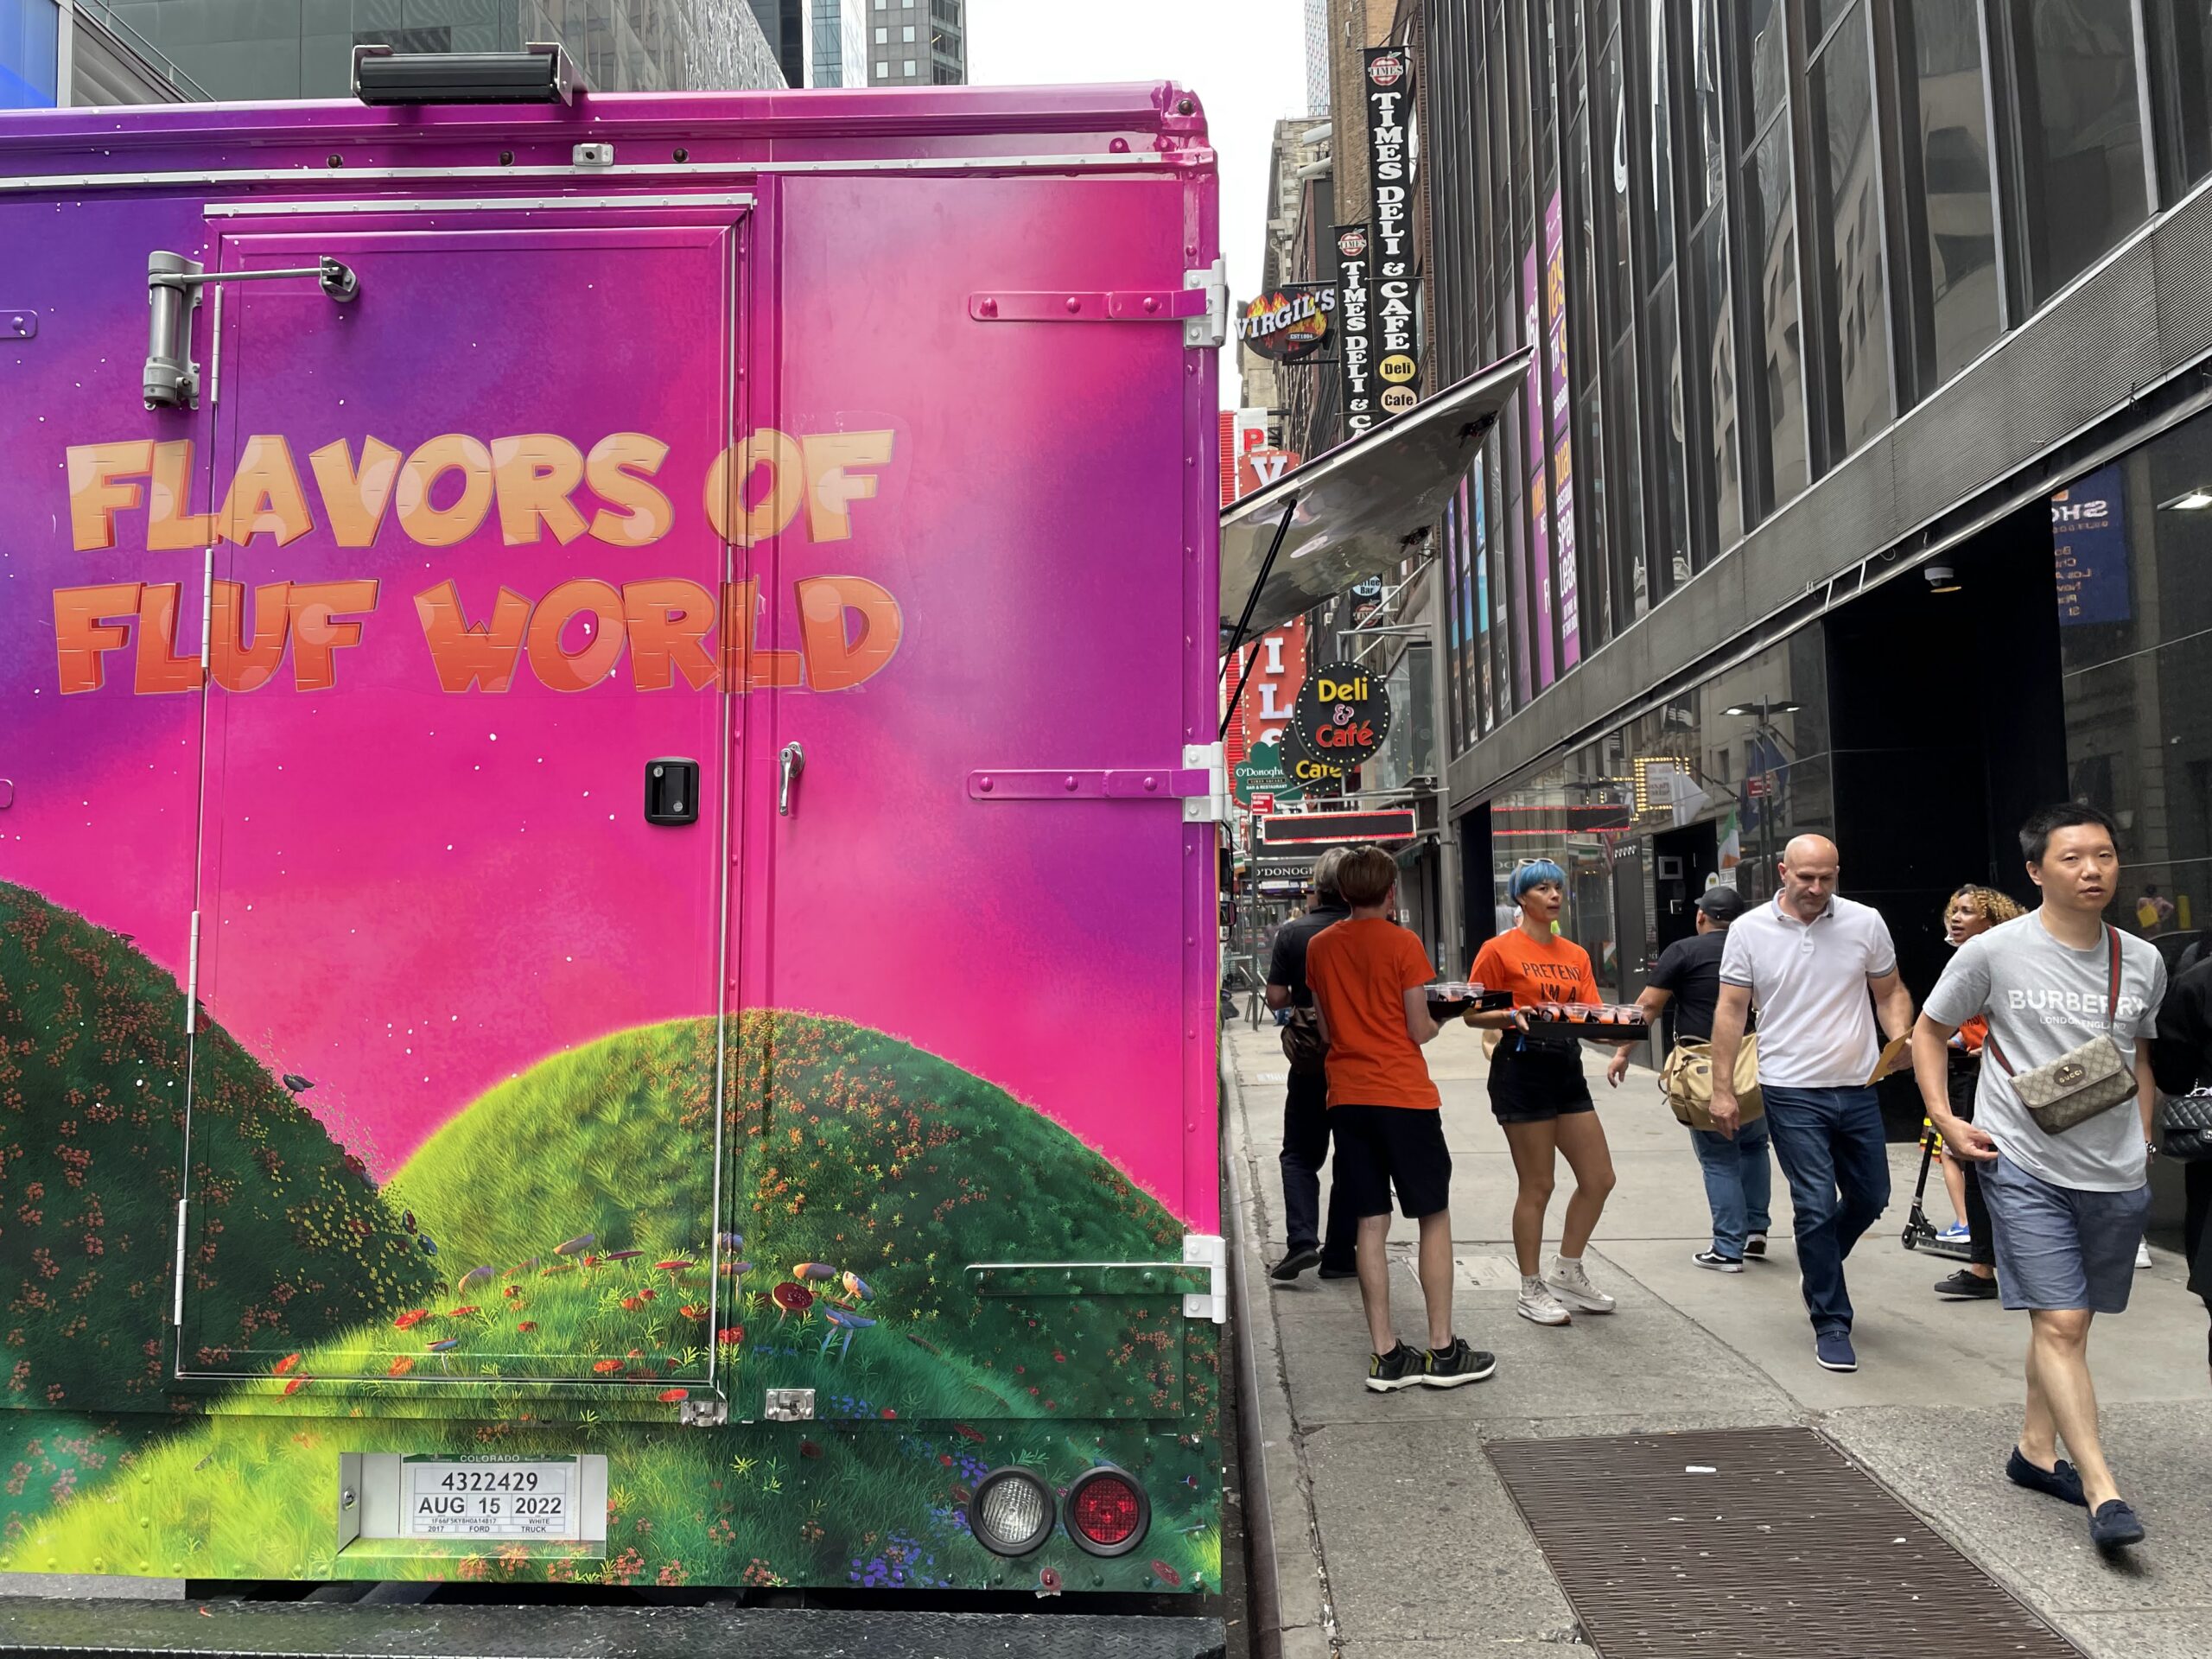 New York City, Miami, Atlanta, California, food truck promotions, branded food truck, mobile experneital campaigns in New York City, nyc